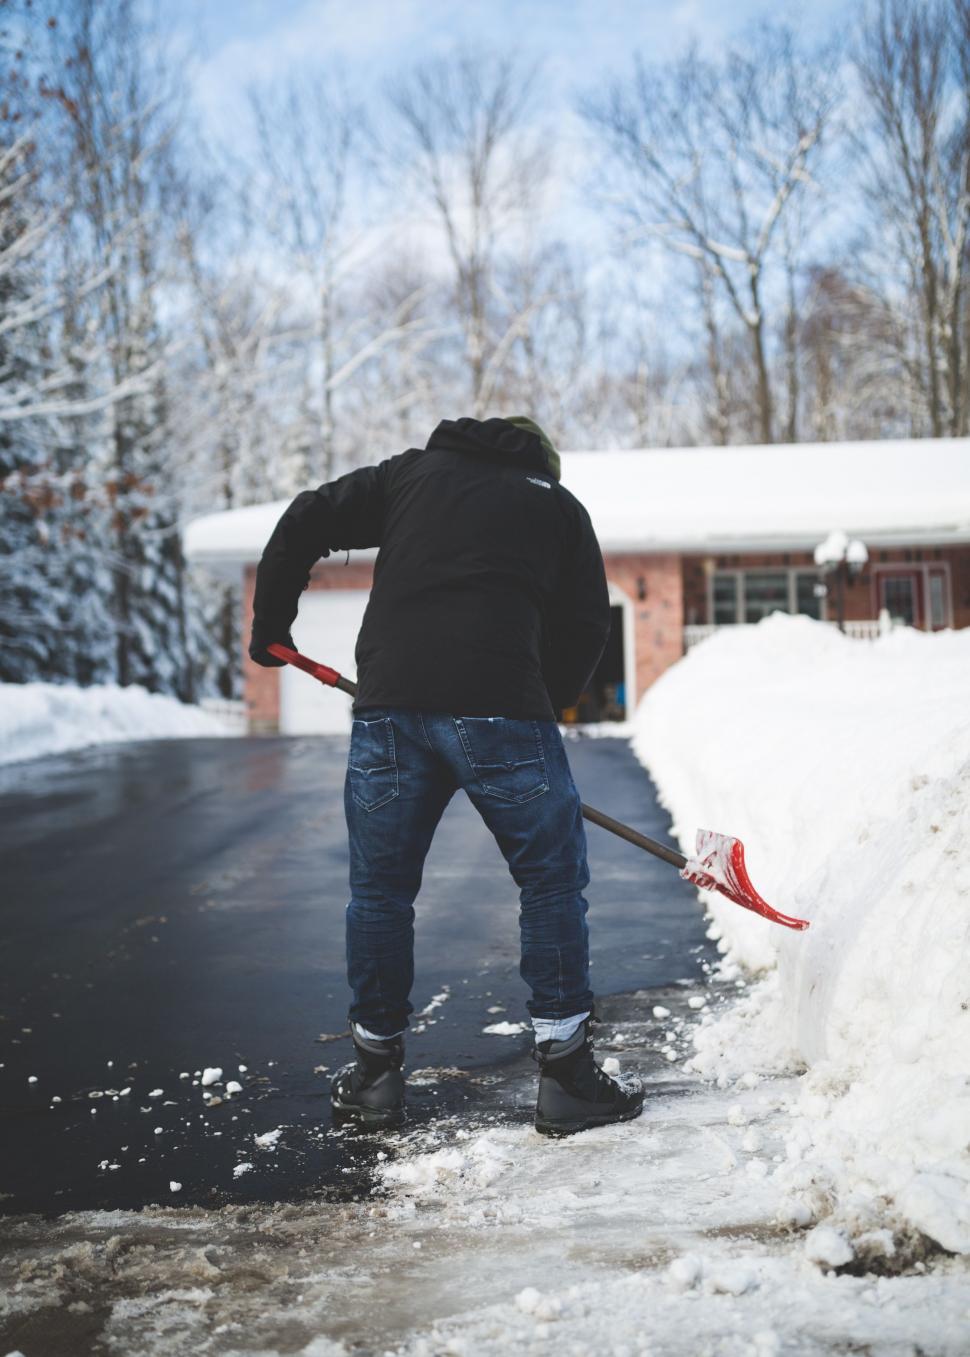 Free Image of Man Shoveling Snow With a Shovel 